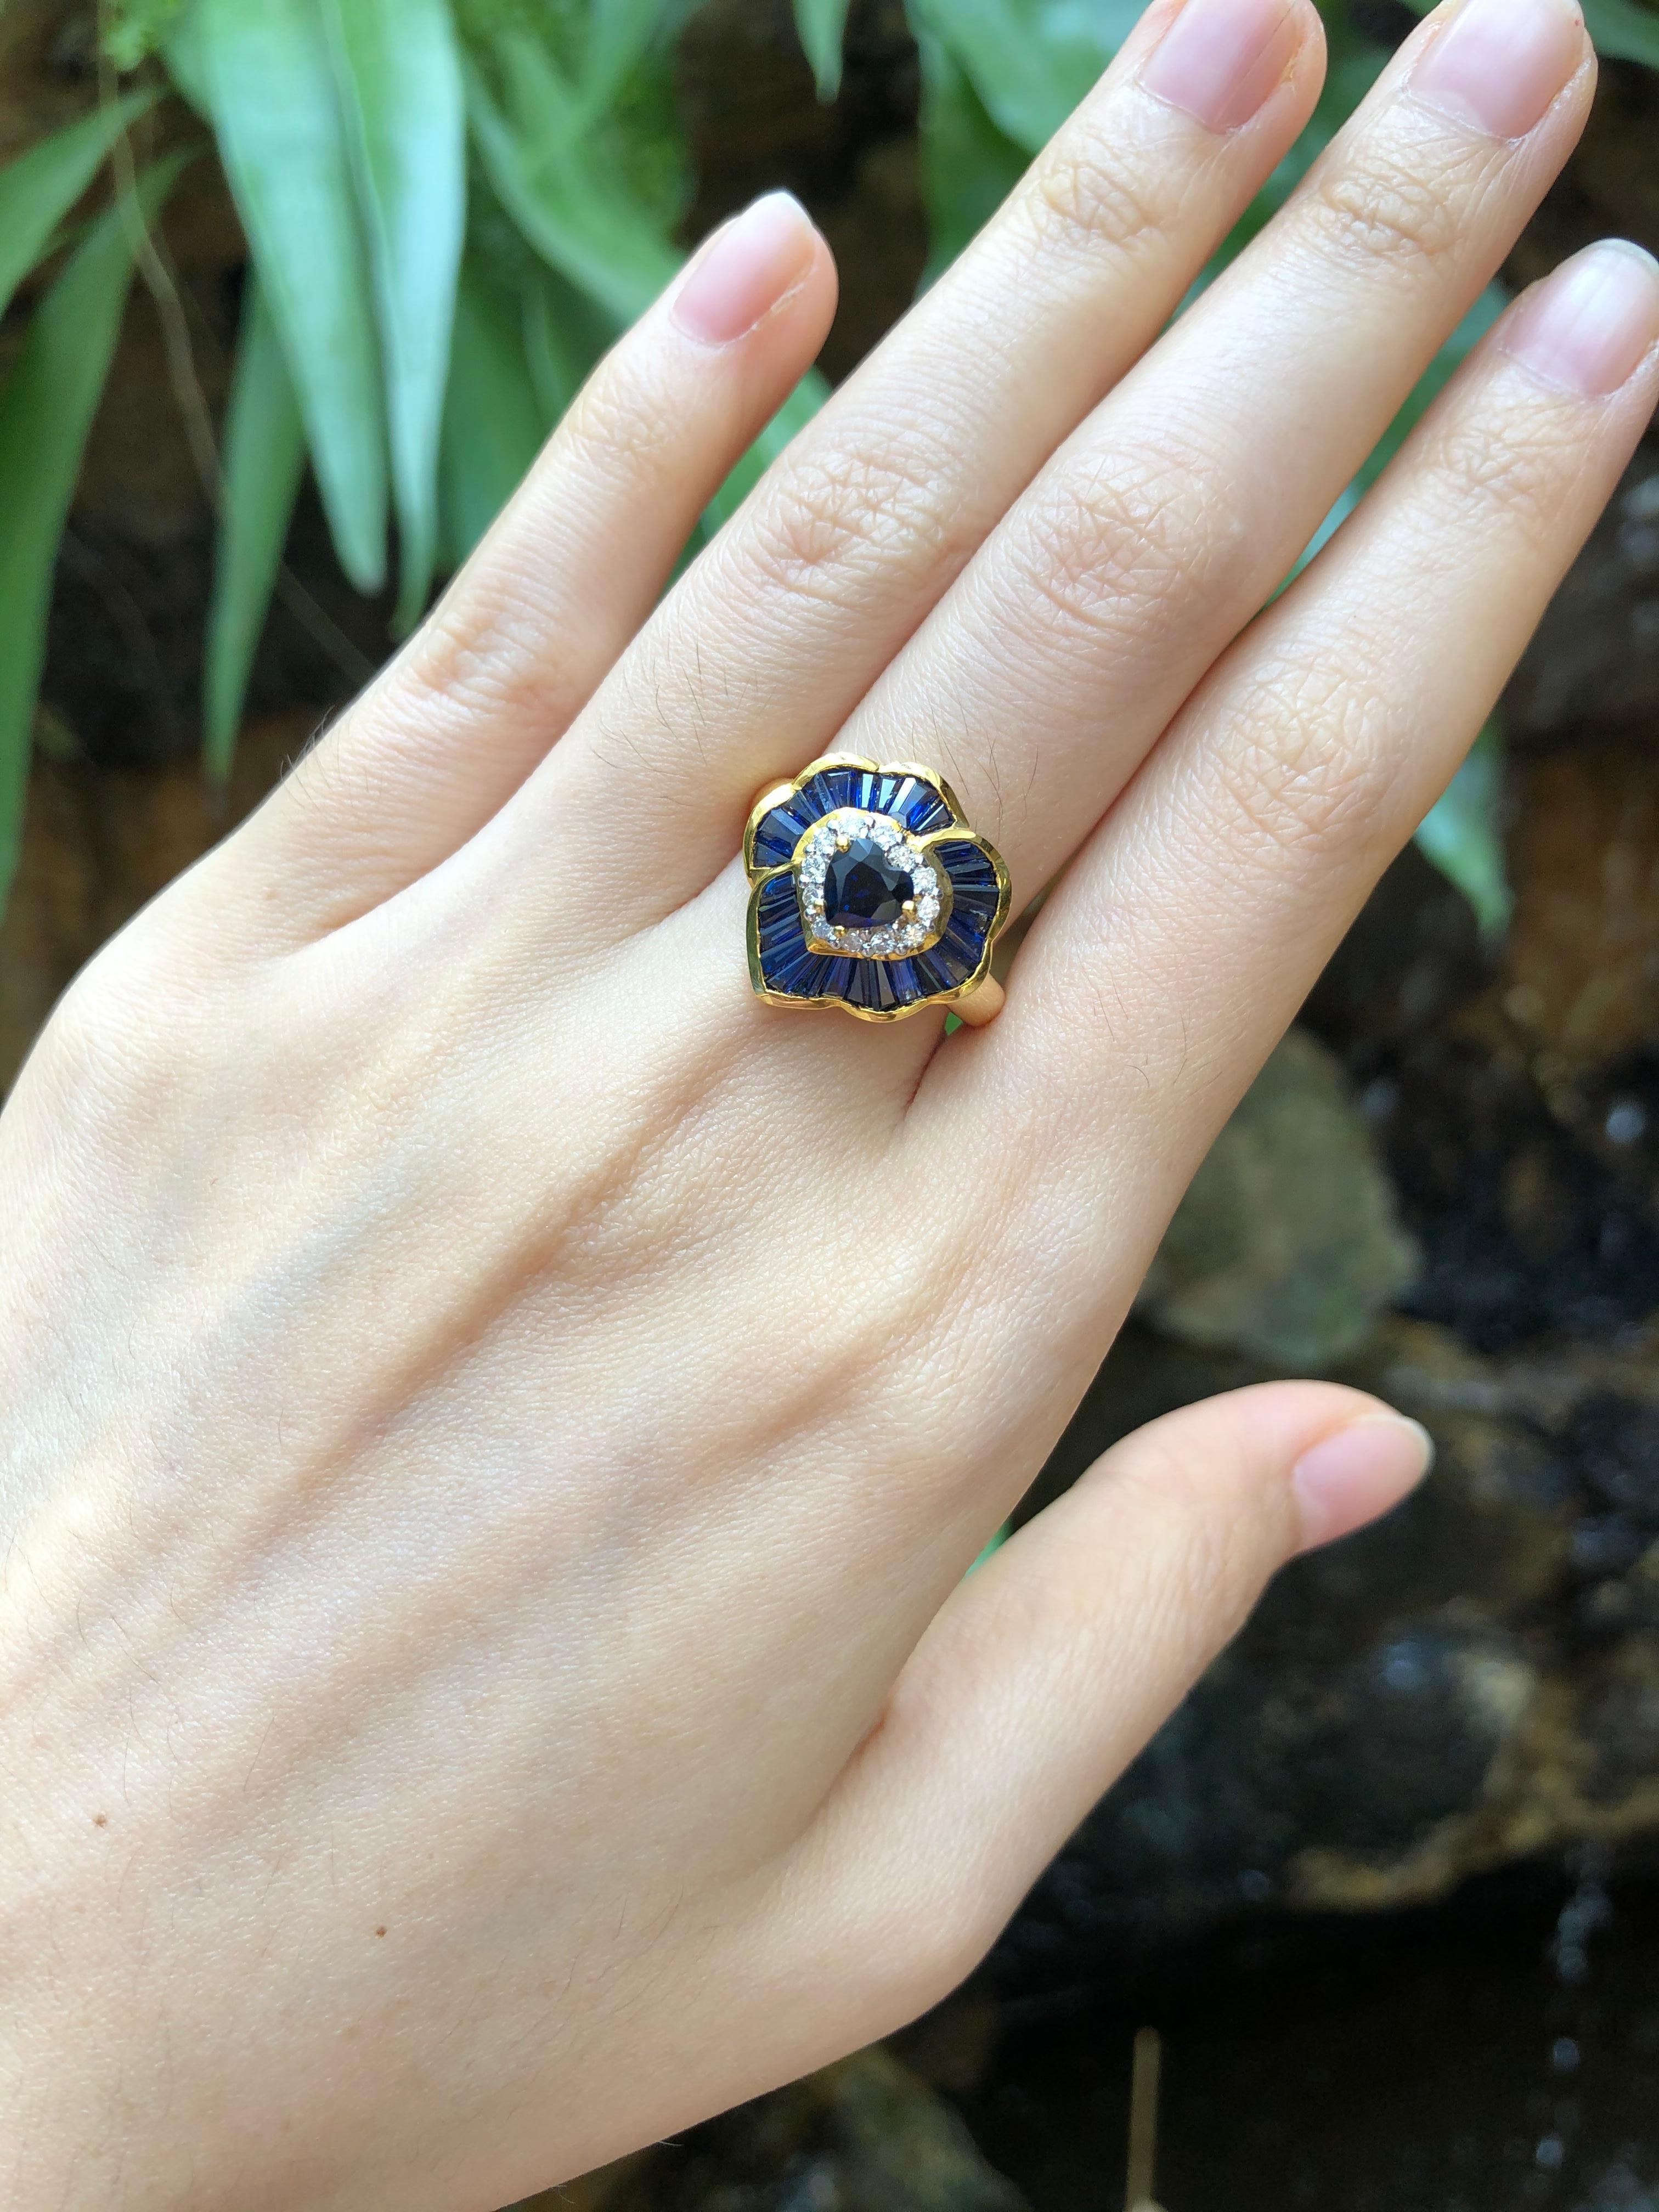 Blue Sapphire 3.20 carats with Diamond Ring set in 18 Karat Gold Settings
Width:  1.6 cm 
Length: 1.7 cm
Ring Size: 55
Total Weight: 6.06 grams

